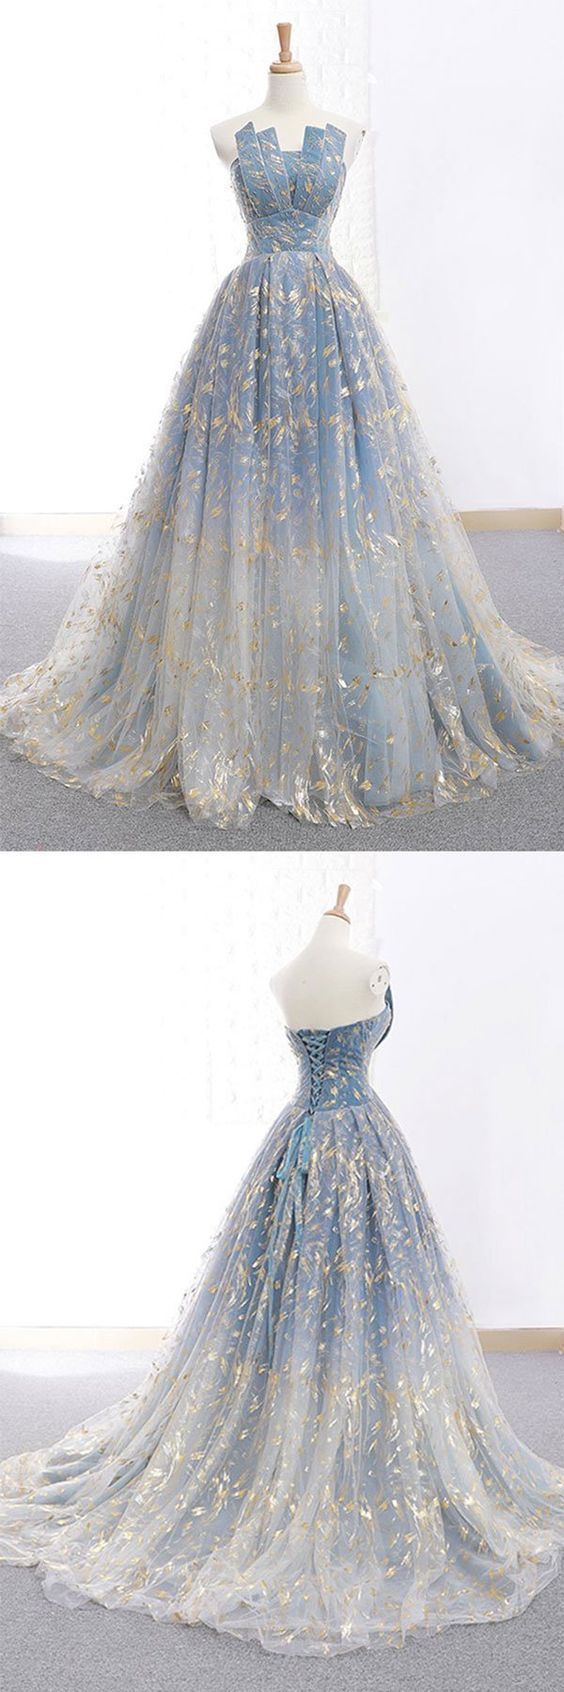 Ball Gown Blue Prom Dress With Delicate Gold Leaf Lace